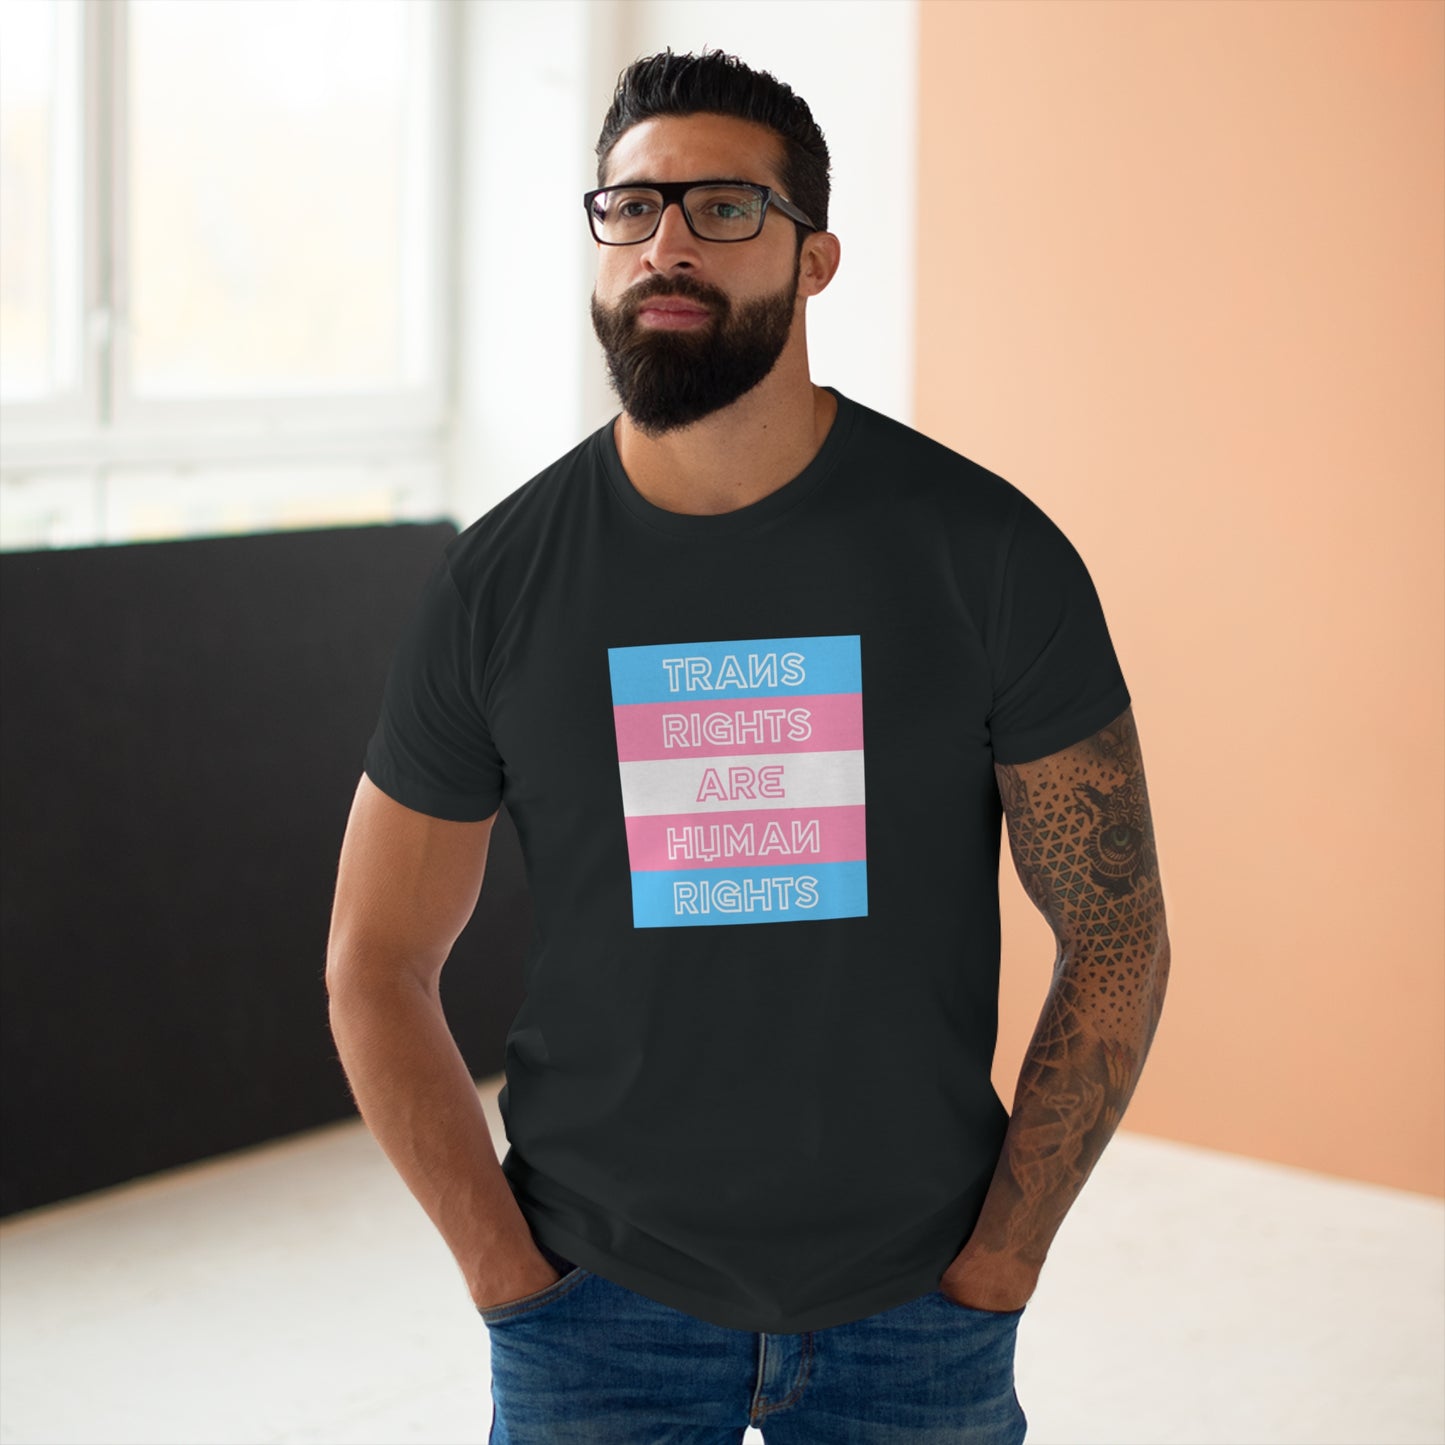 "TRANS RIGHTS ARE HUMAN RIGHTS"  T-Shirt